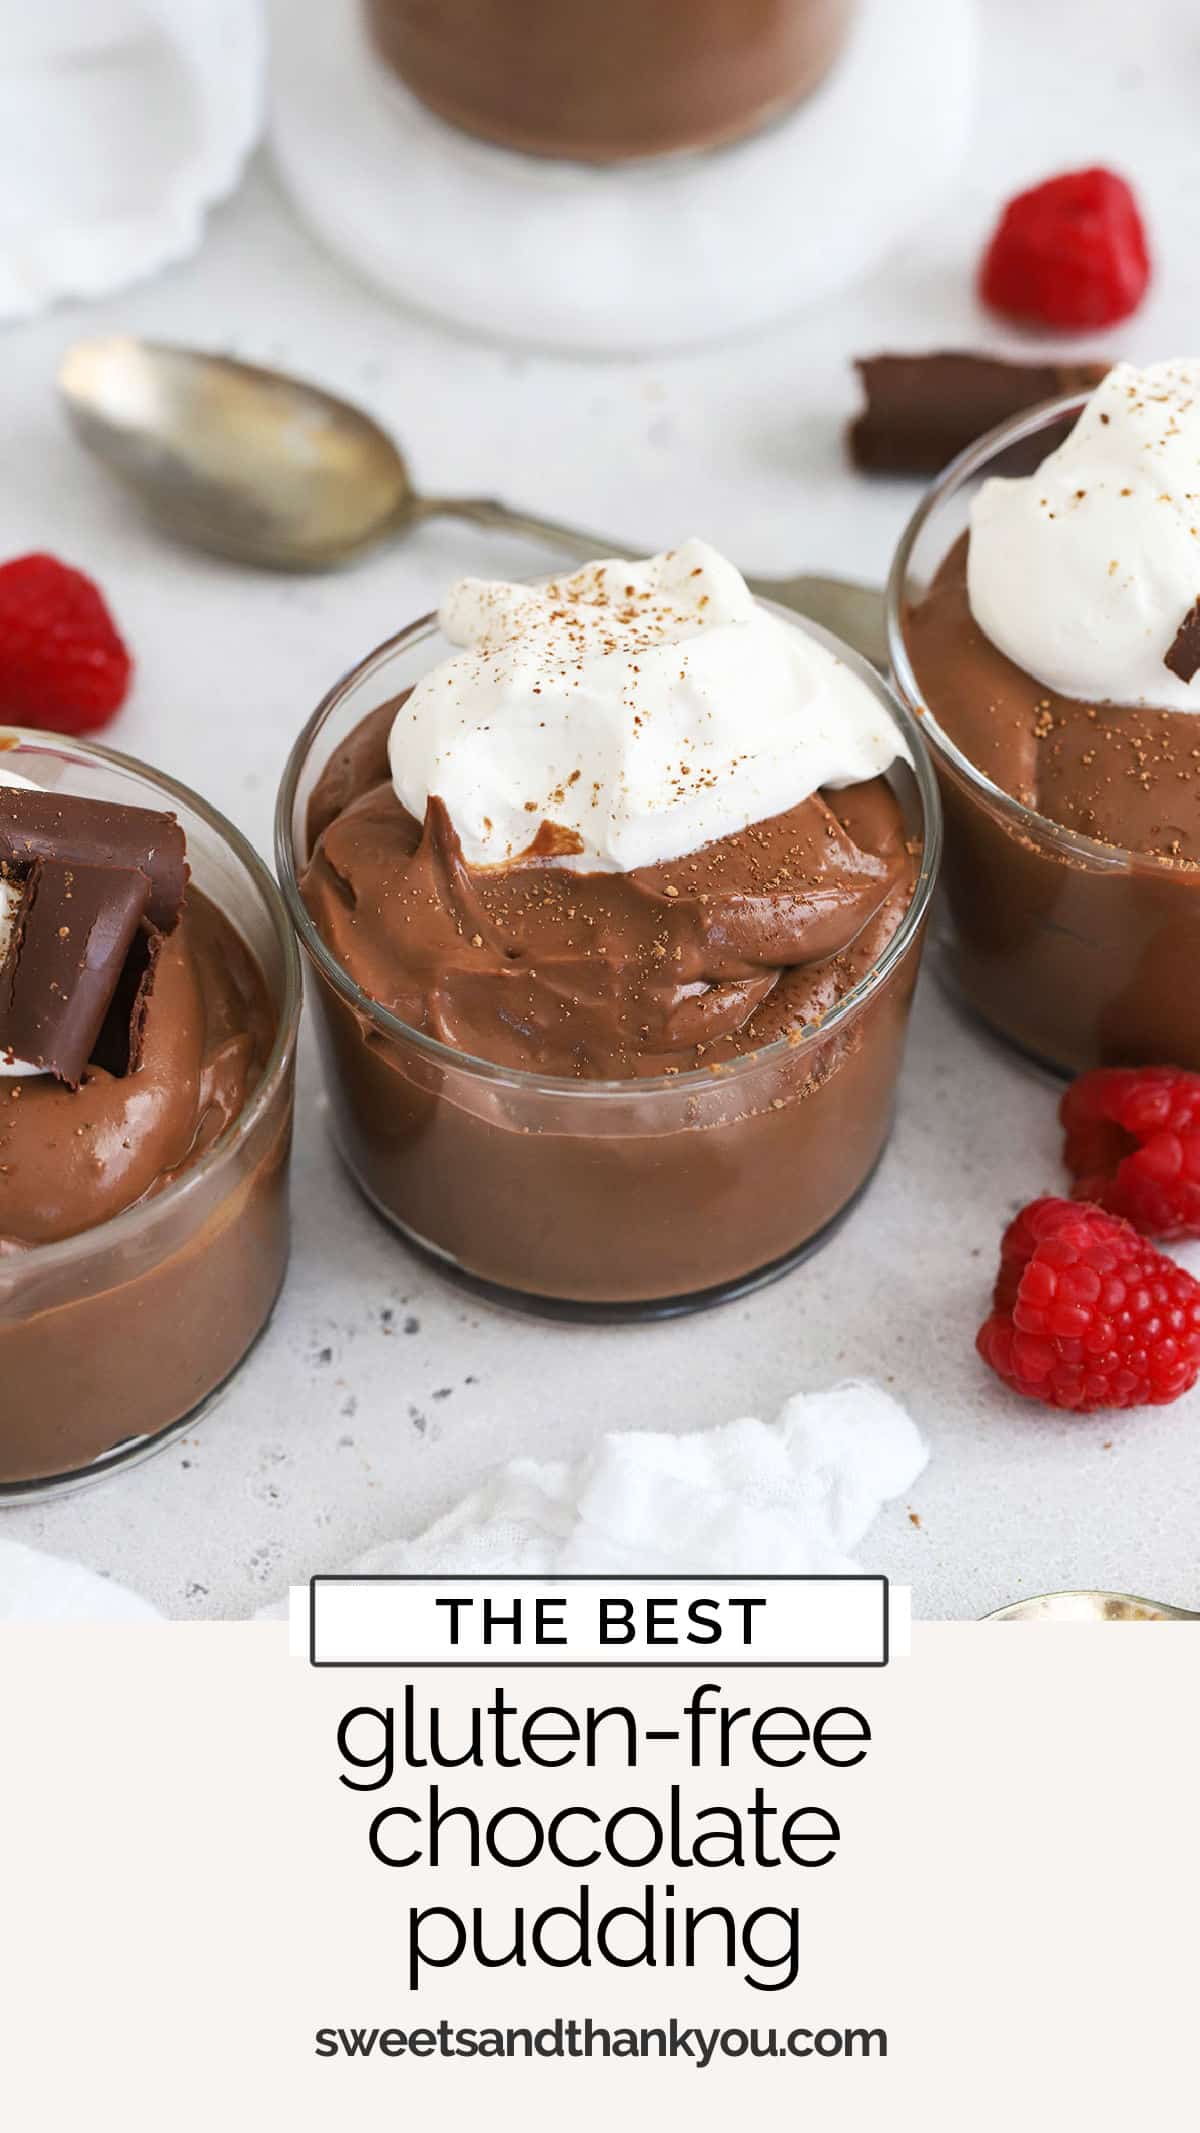 This easy homemade gluten-free chocolate pudding recipe is made from simple ingredients and tastes DELICIOUS! You'll love all the classic flavor in this easy recipe! / homemade chocolate pudding recipe / easy gluten free chocolate pudding recipe / no bake gluten free dessert / no bake chocolate pudding / gluten free pudding recipe / the best gluten free pudding / the best gluten-free chocolate pudding recipe/